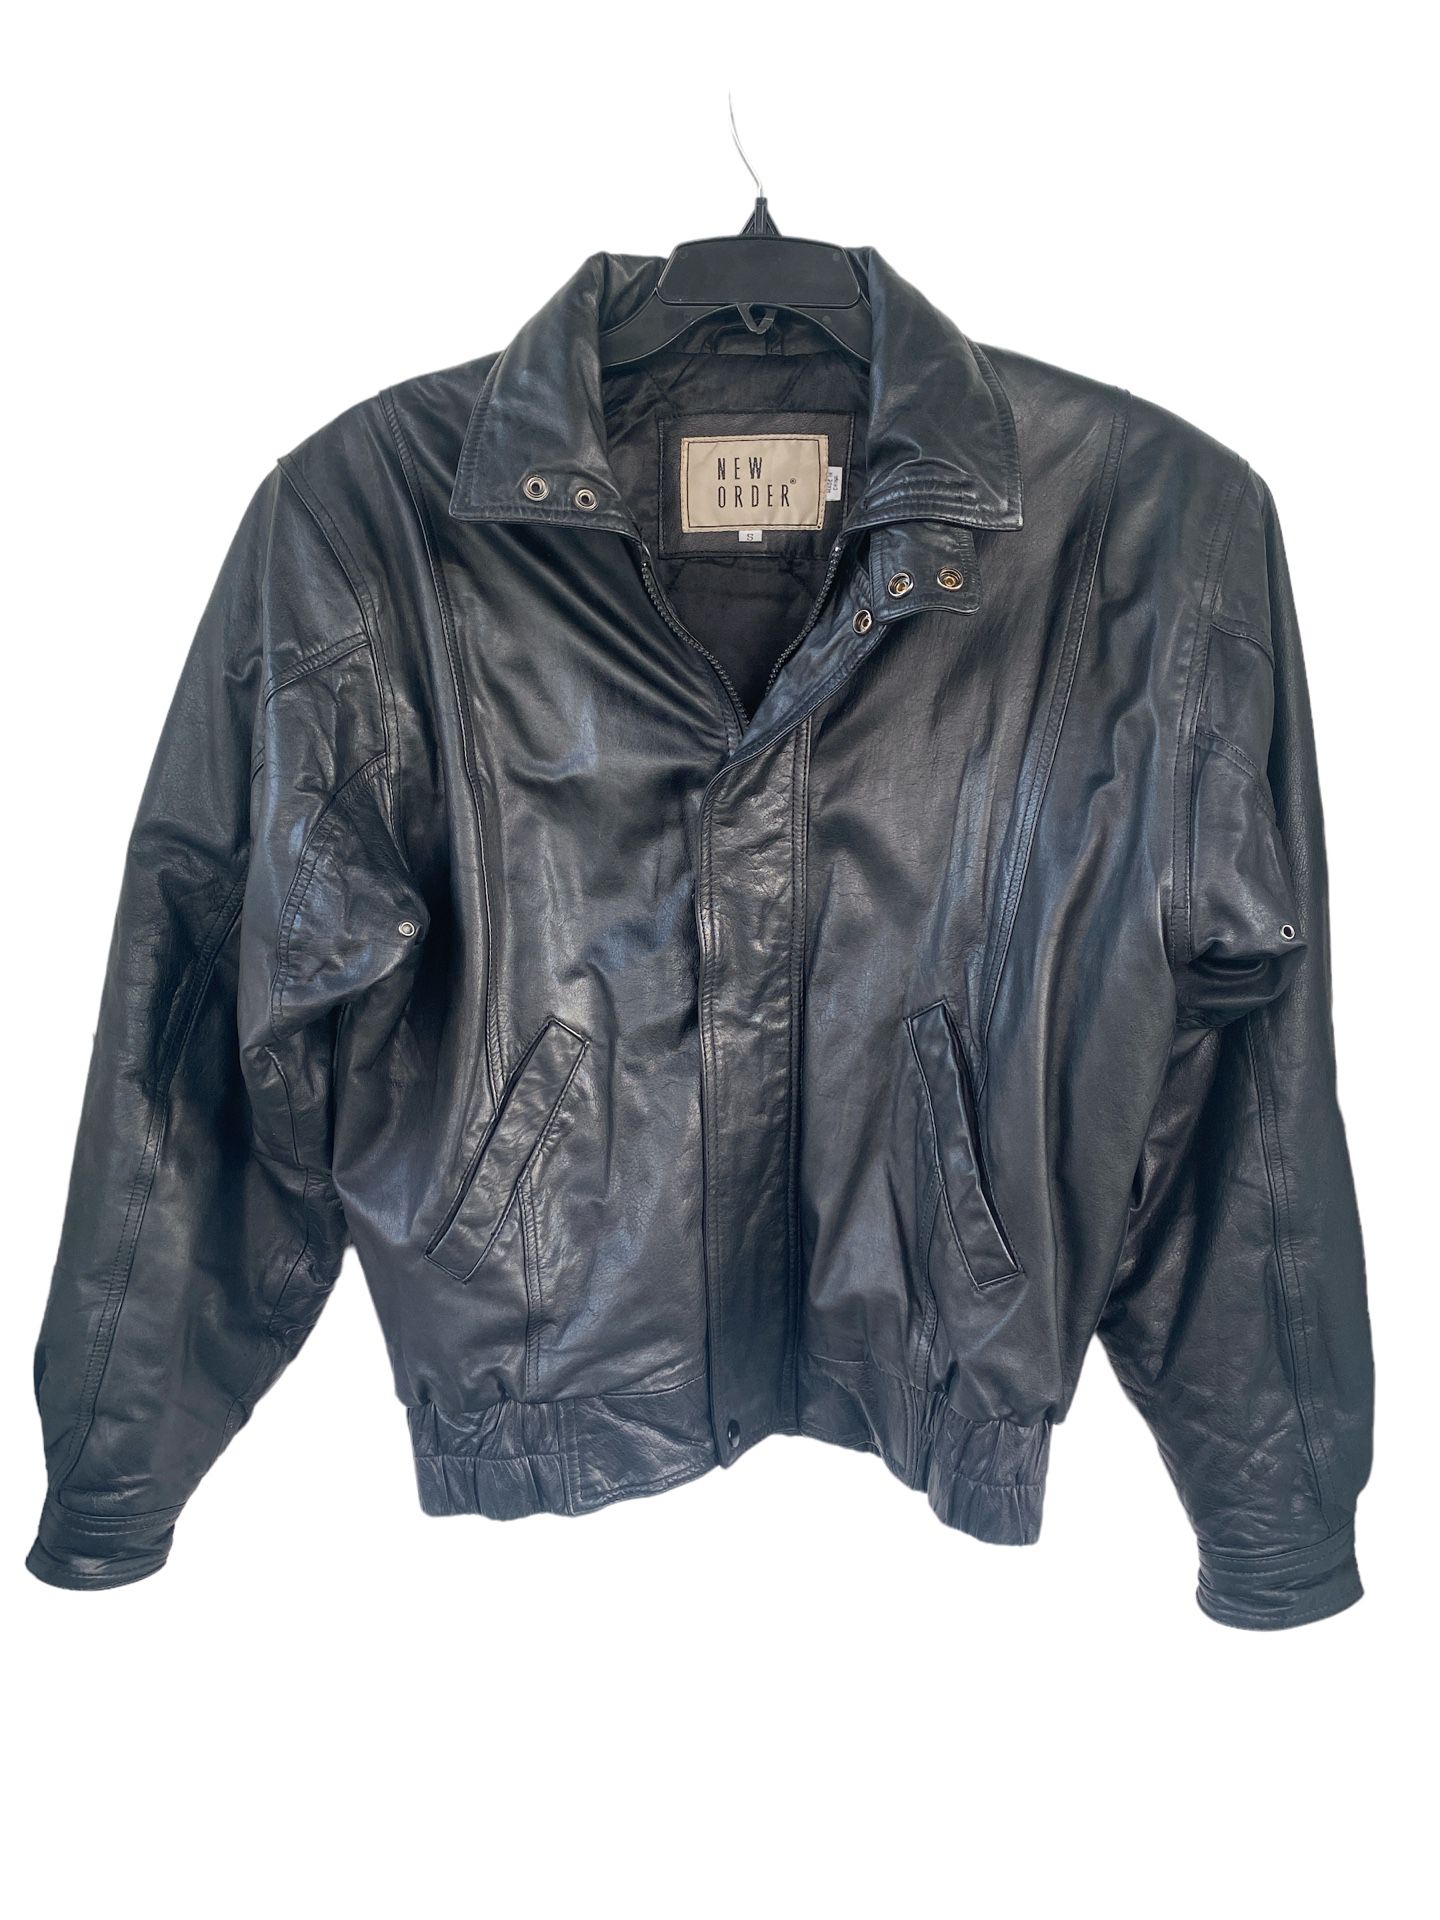 New Order Vintage 80's Black Leather Bomber Jacket Aviator Flyboy Size Small